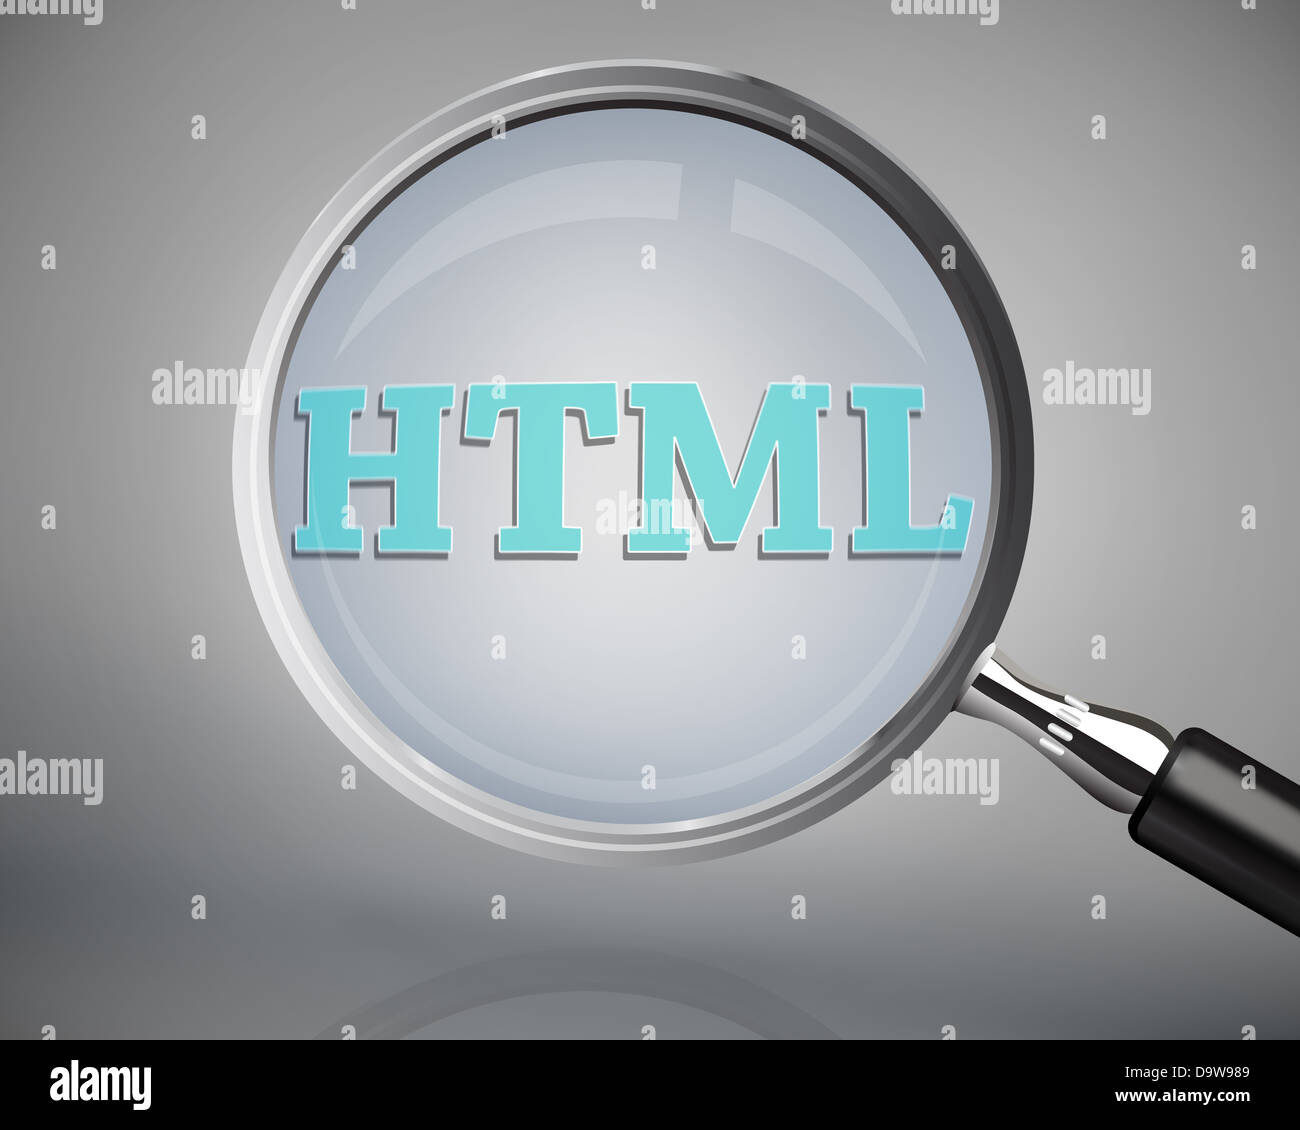 Magnifying glass showing html word Stock Photo